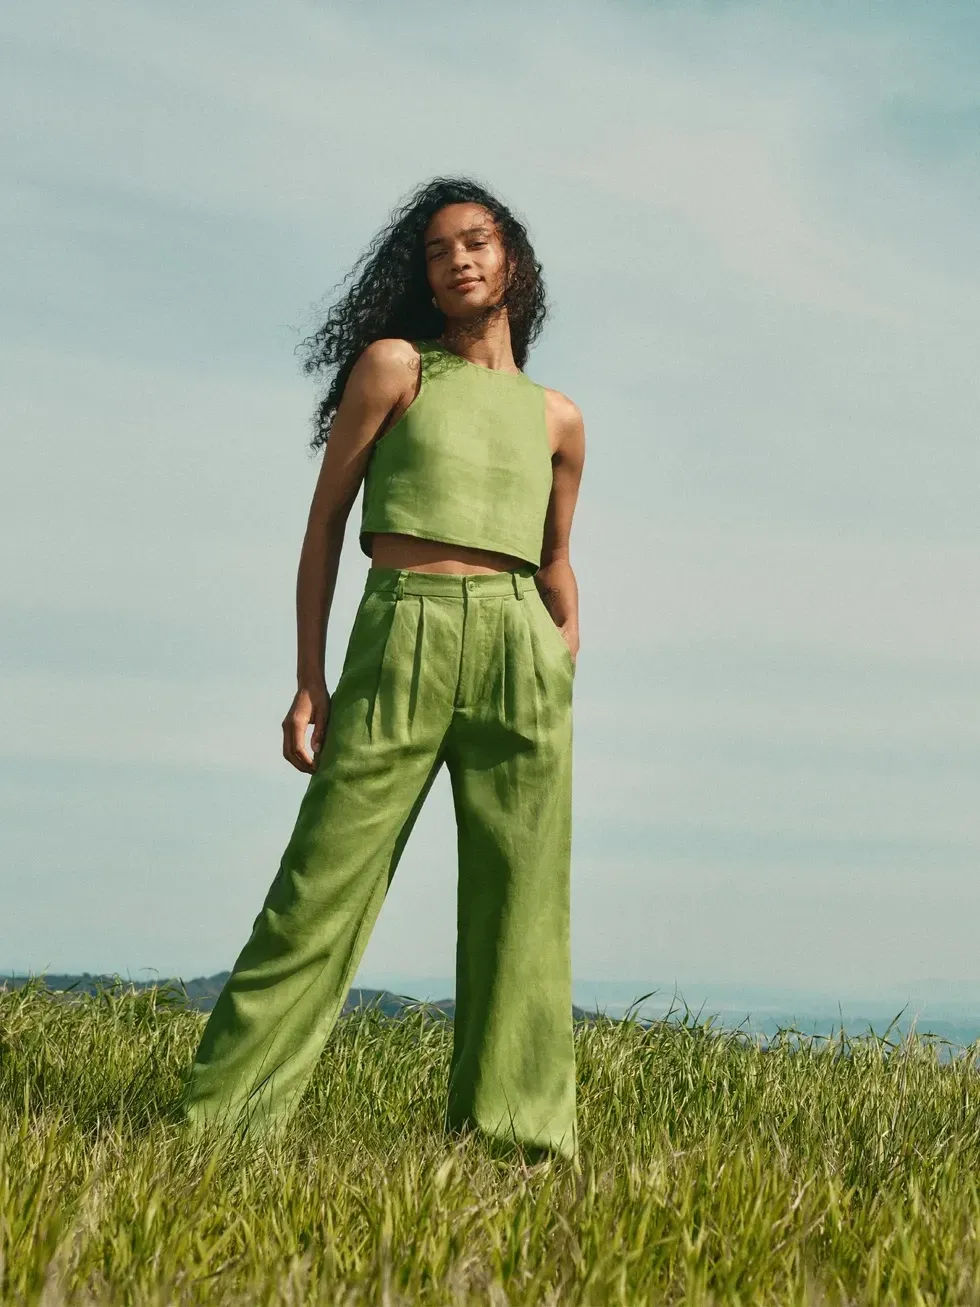 Linen Pants Outfits For Summer 2023 - Brit + Co